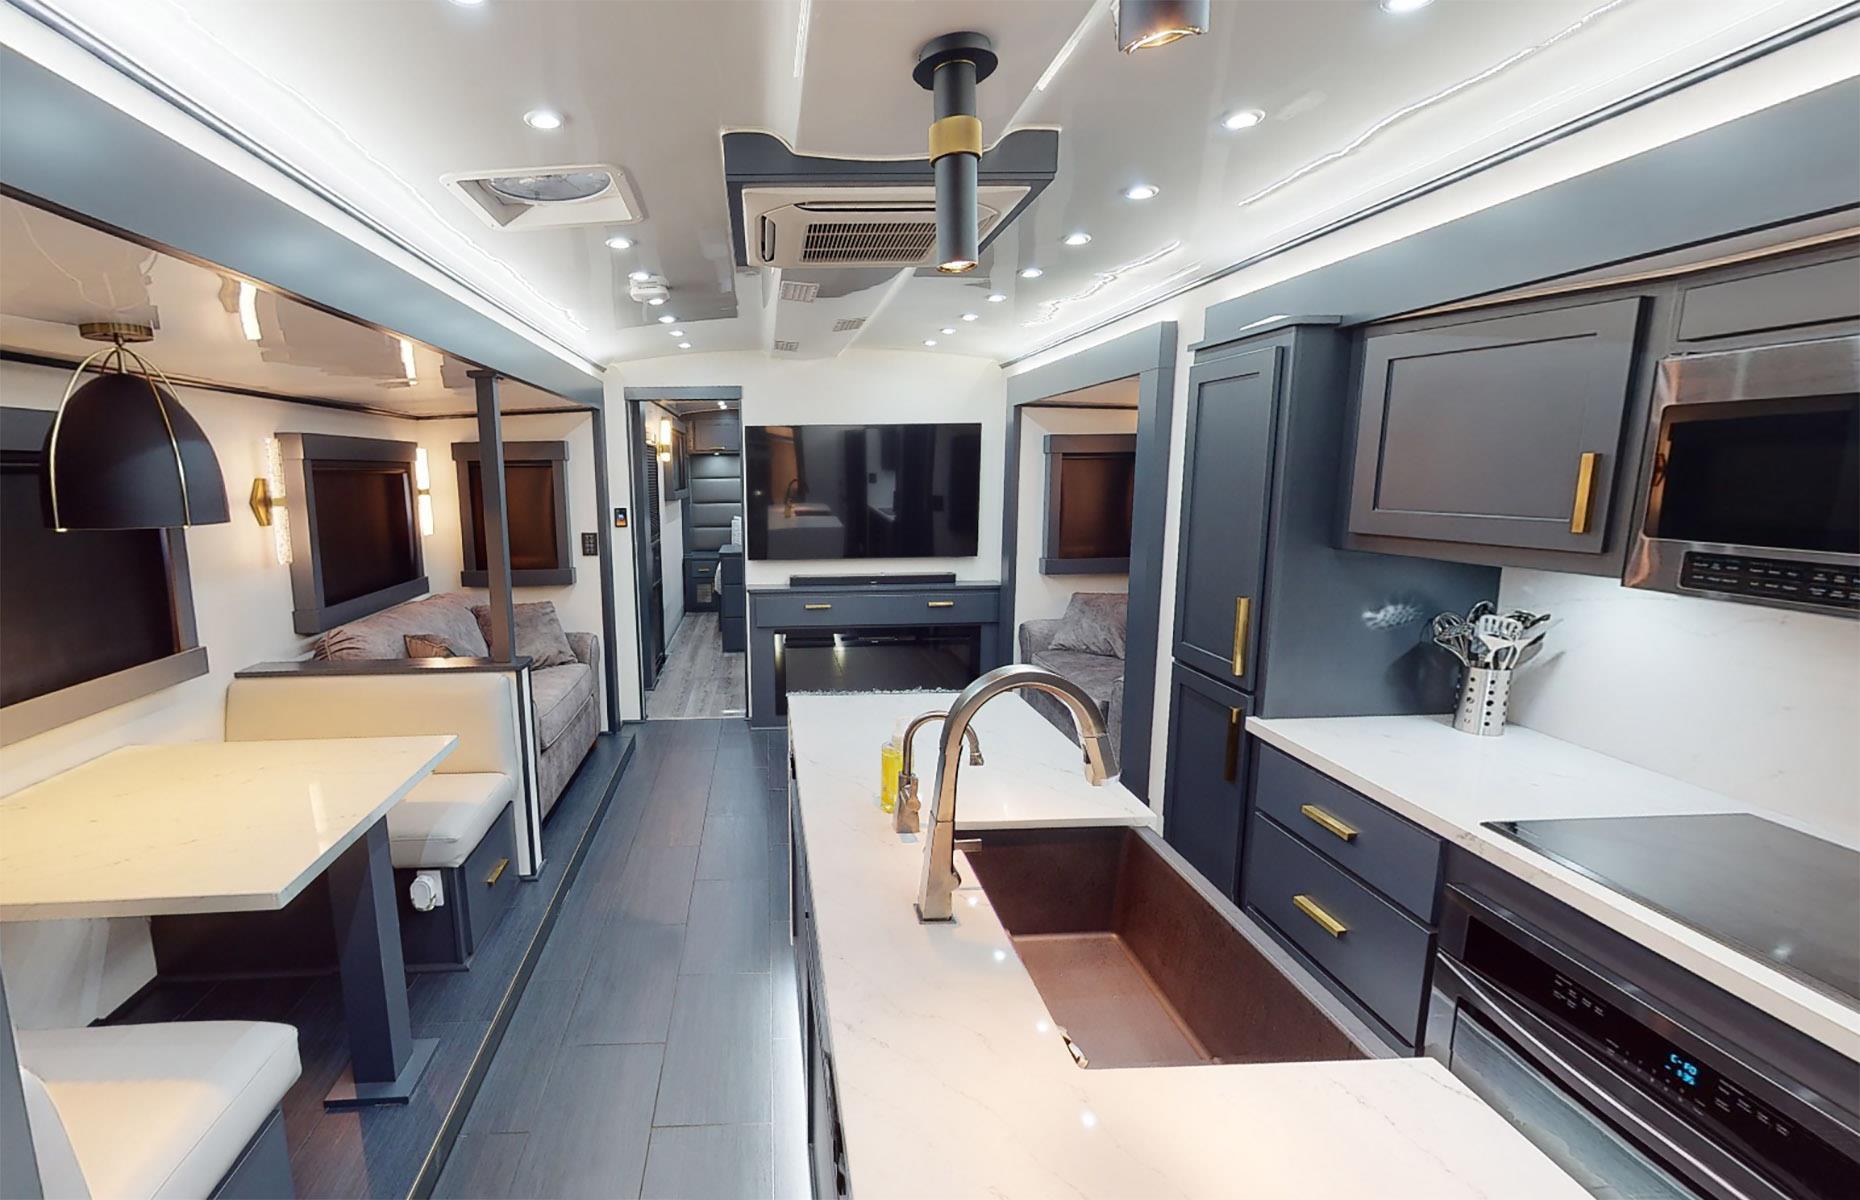 <p>As you can see in this custom design, the décor is simple and elegant, with a smart, traditional feel. Space is cleverly used and quality fixtures and fittings add to the high-spec finish. The living area flows well and is a cut above the sort of interior you'd expect to find in an RV. </p>  <p>In this particular model, the sleek kitchen features beautiful dark cabinetry with gold-hued hardware and even a stunning marble-topped preparation island. </p>